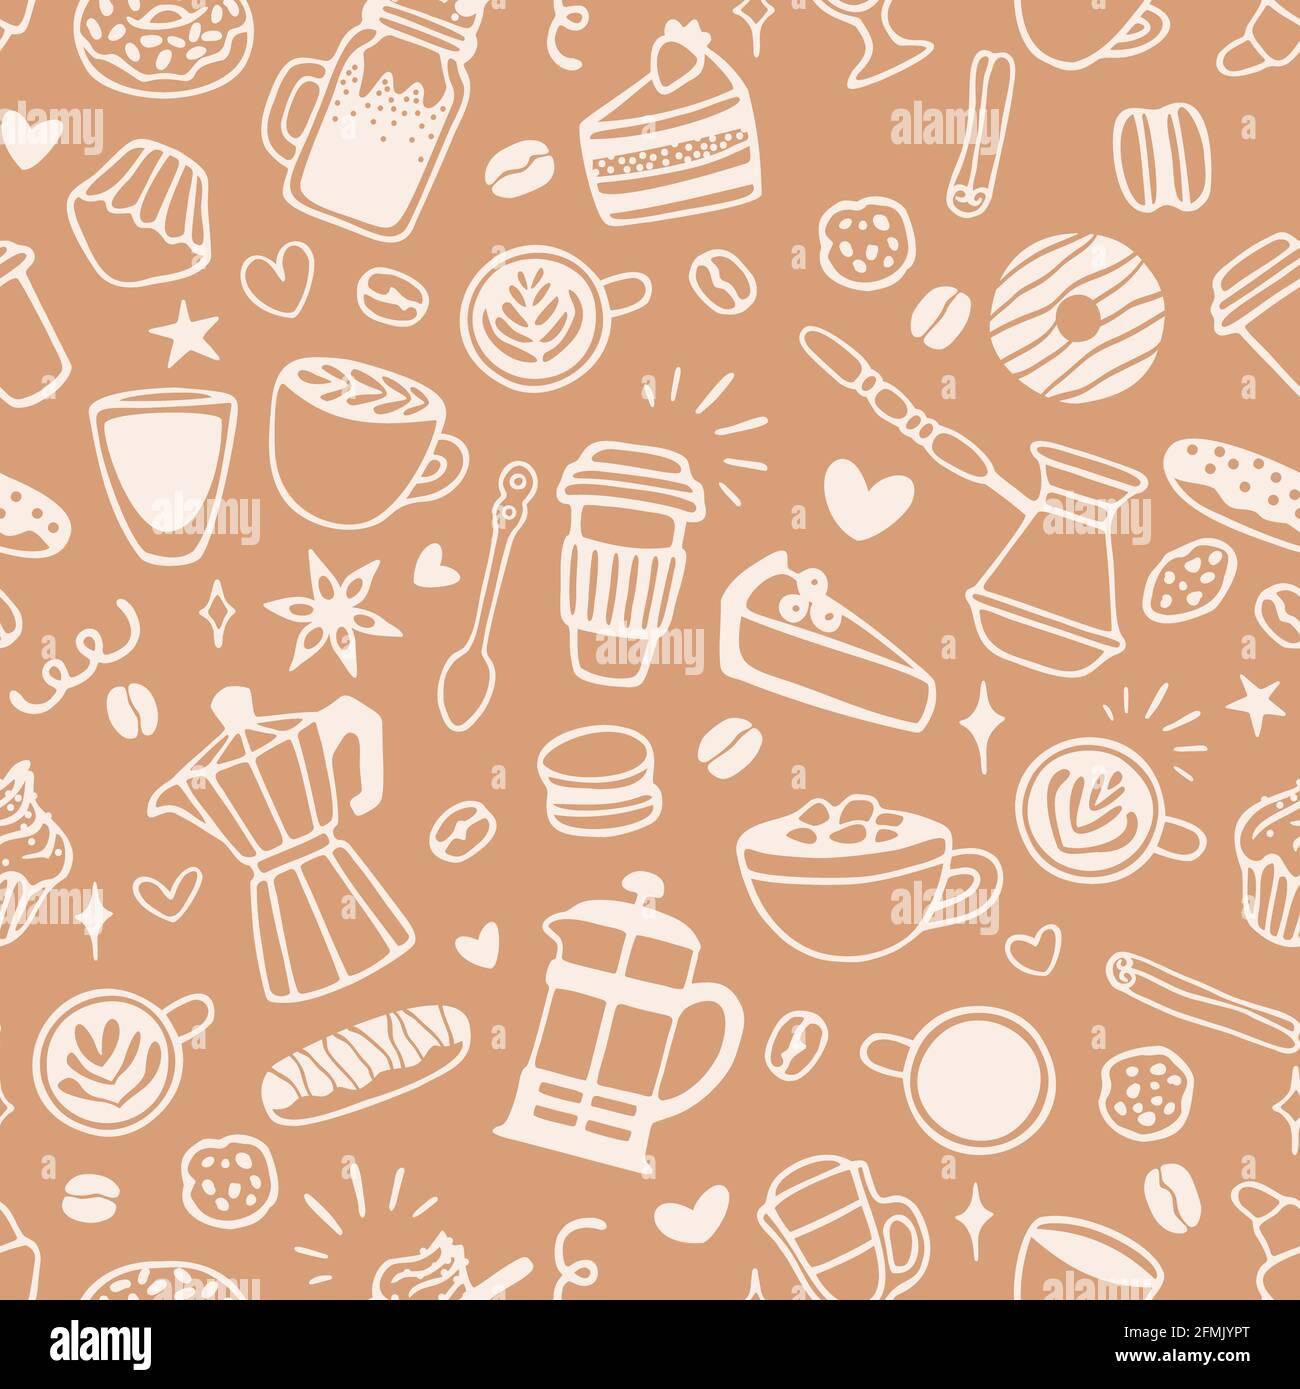 Vector Seamless Pattern With Different Coffee And Dessert Elements